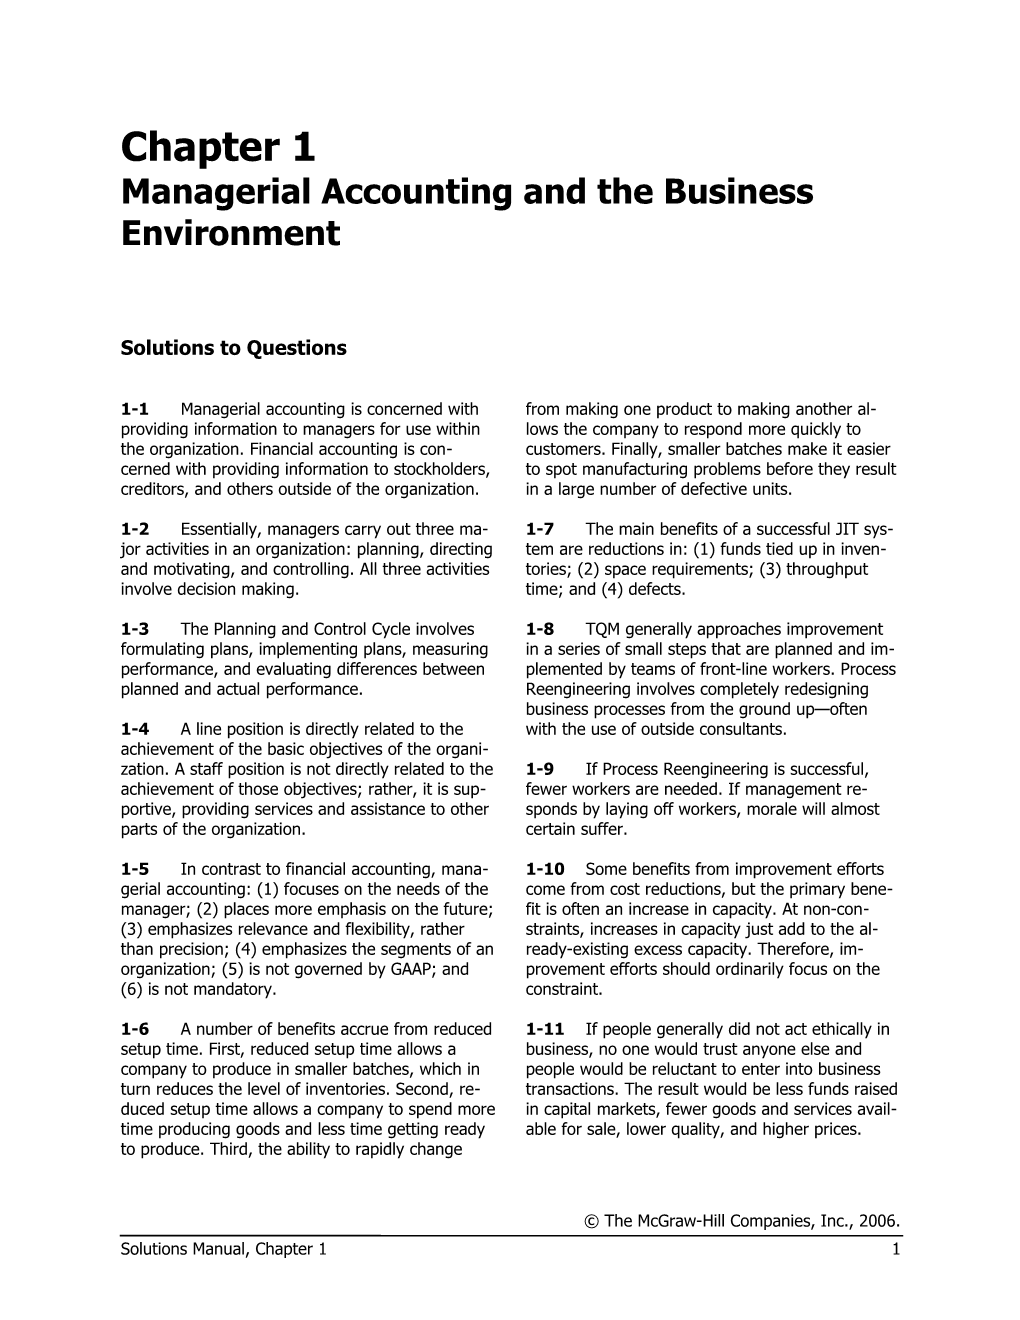 Managerial Accounting and the Business Environment